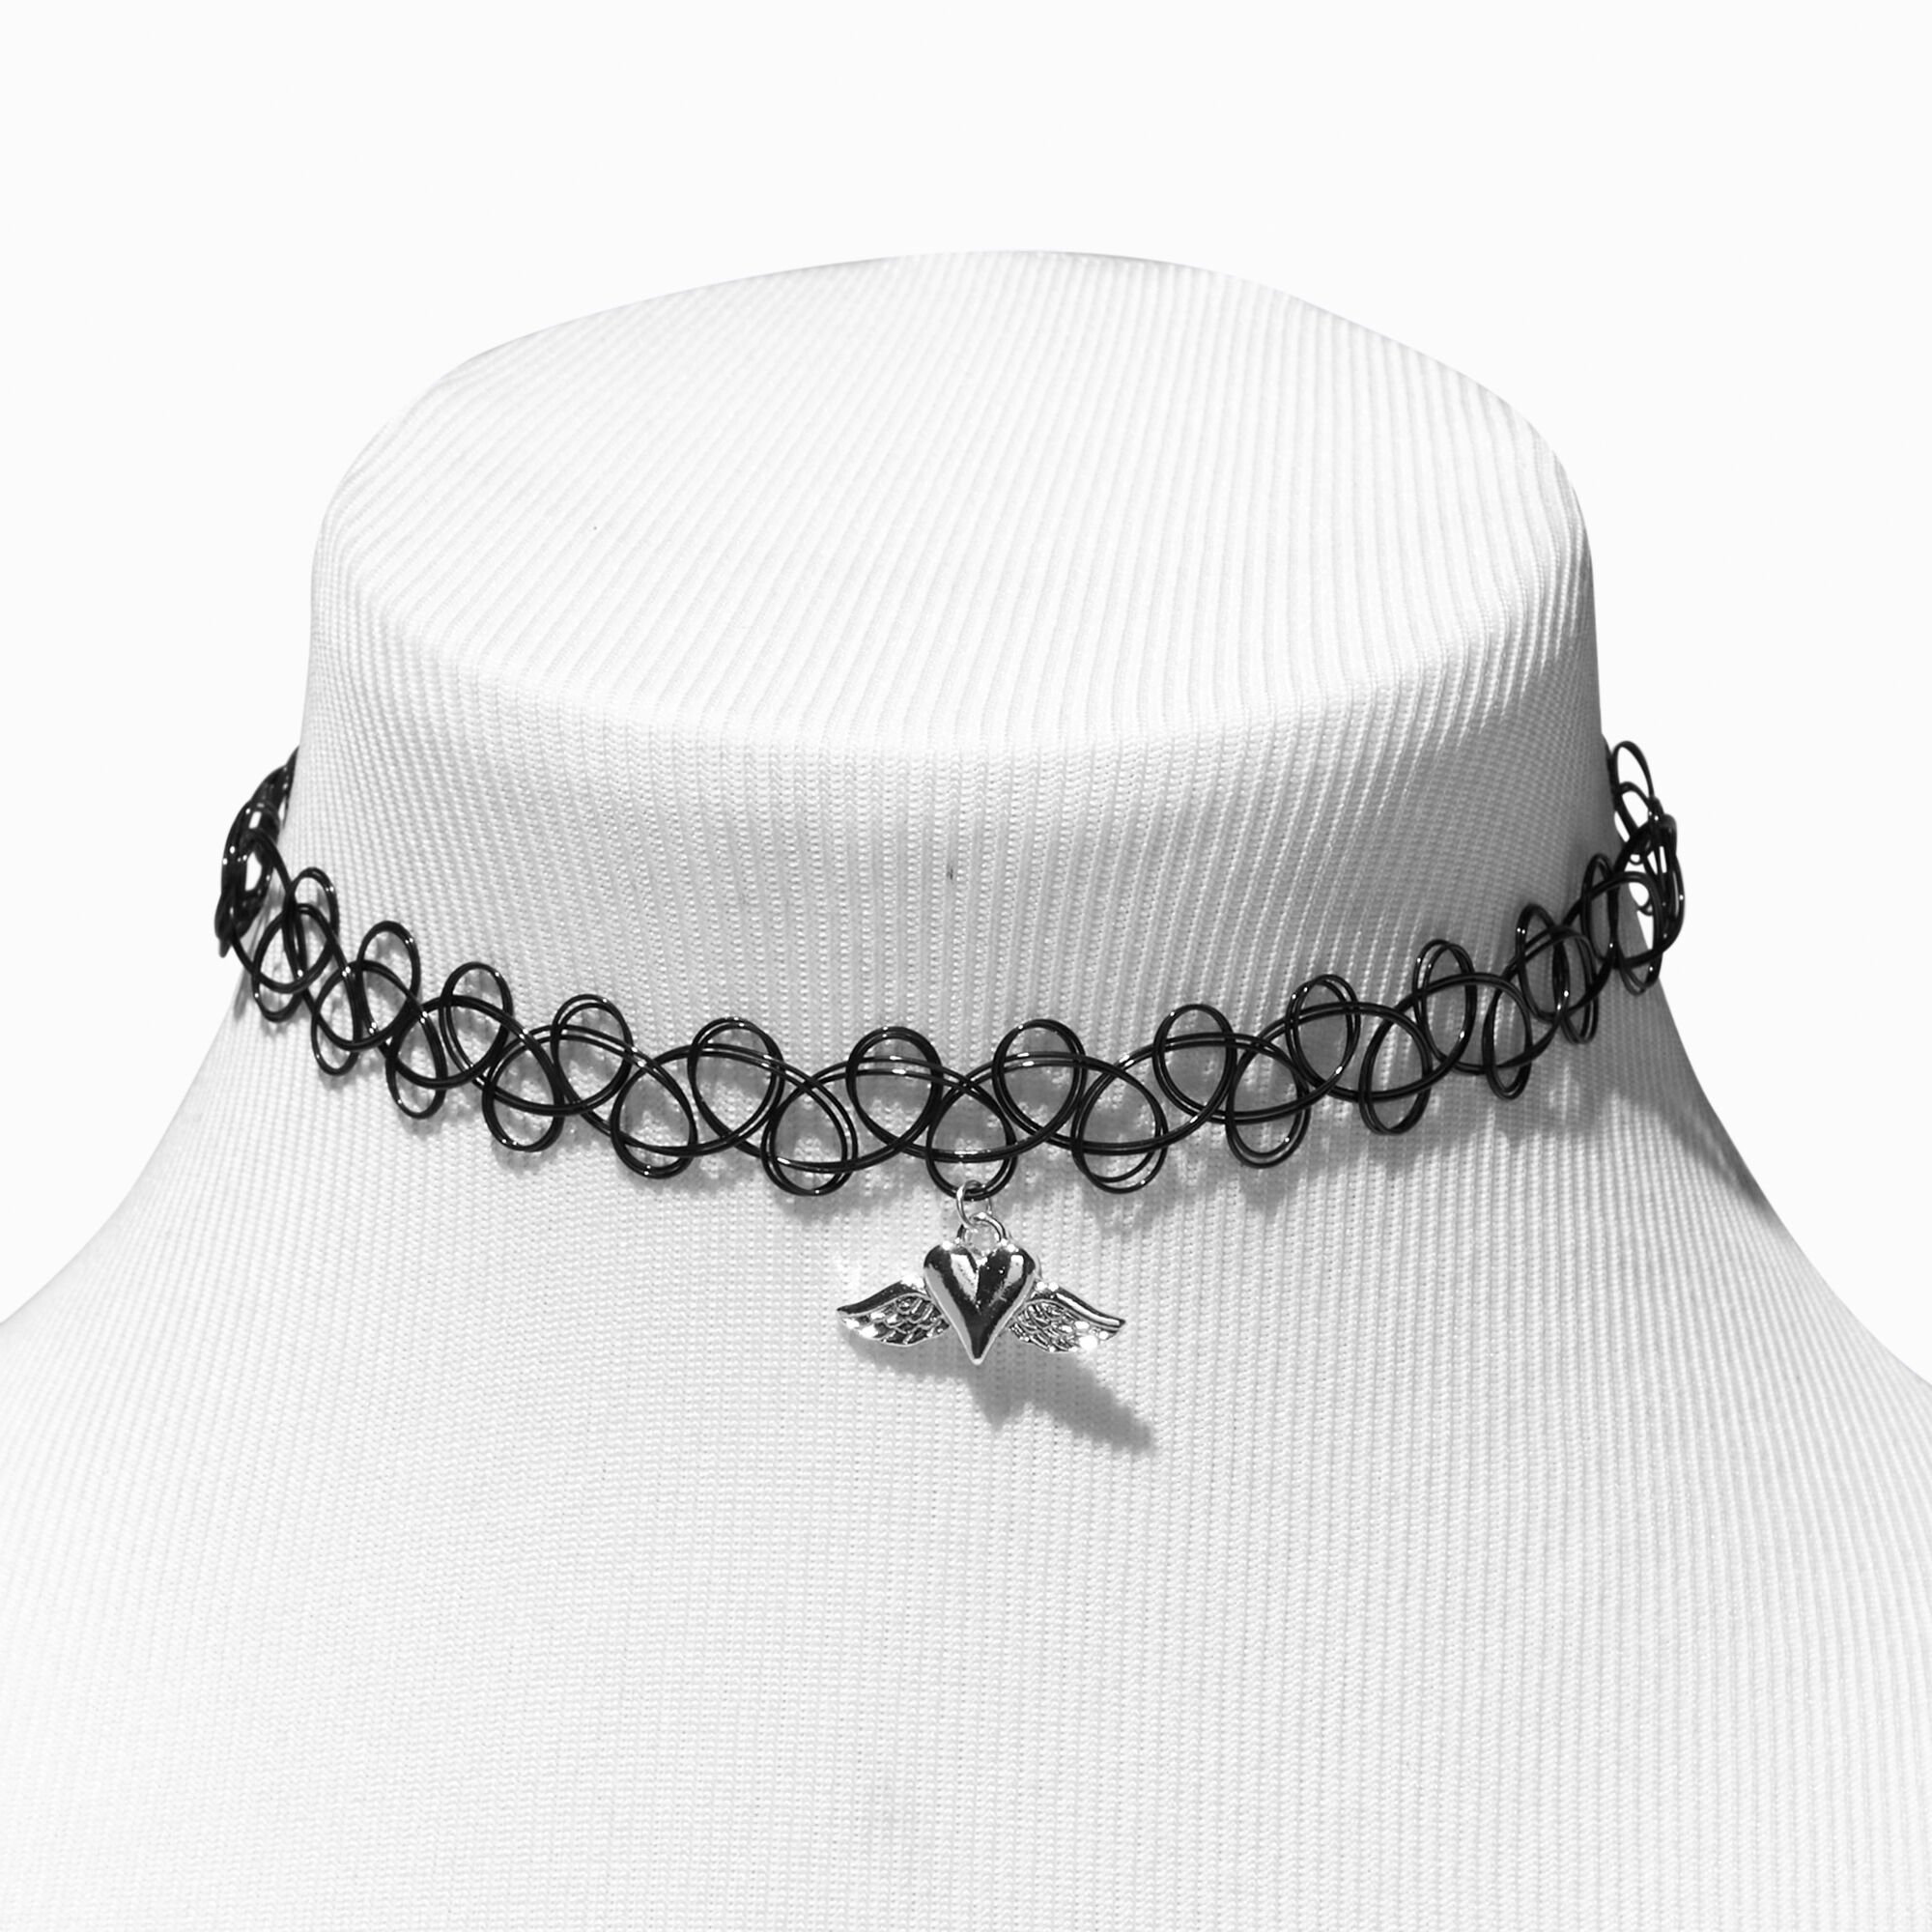 View Claires Silver Heart Angel Wing Pendant Tattoo Choker Necklace Black information